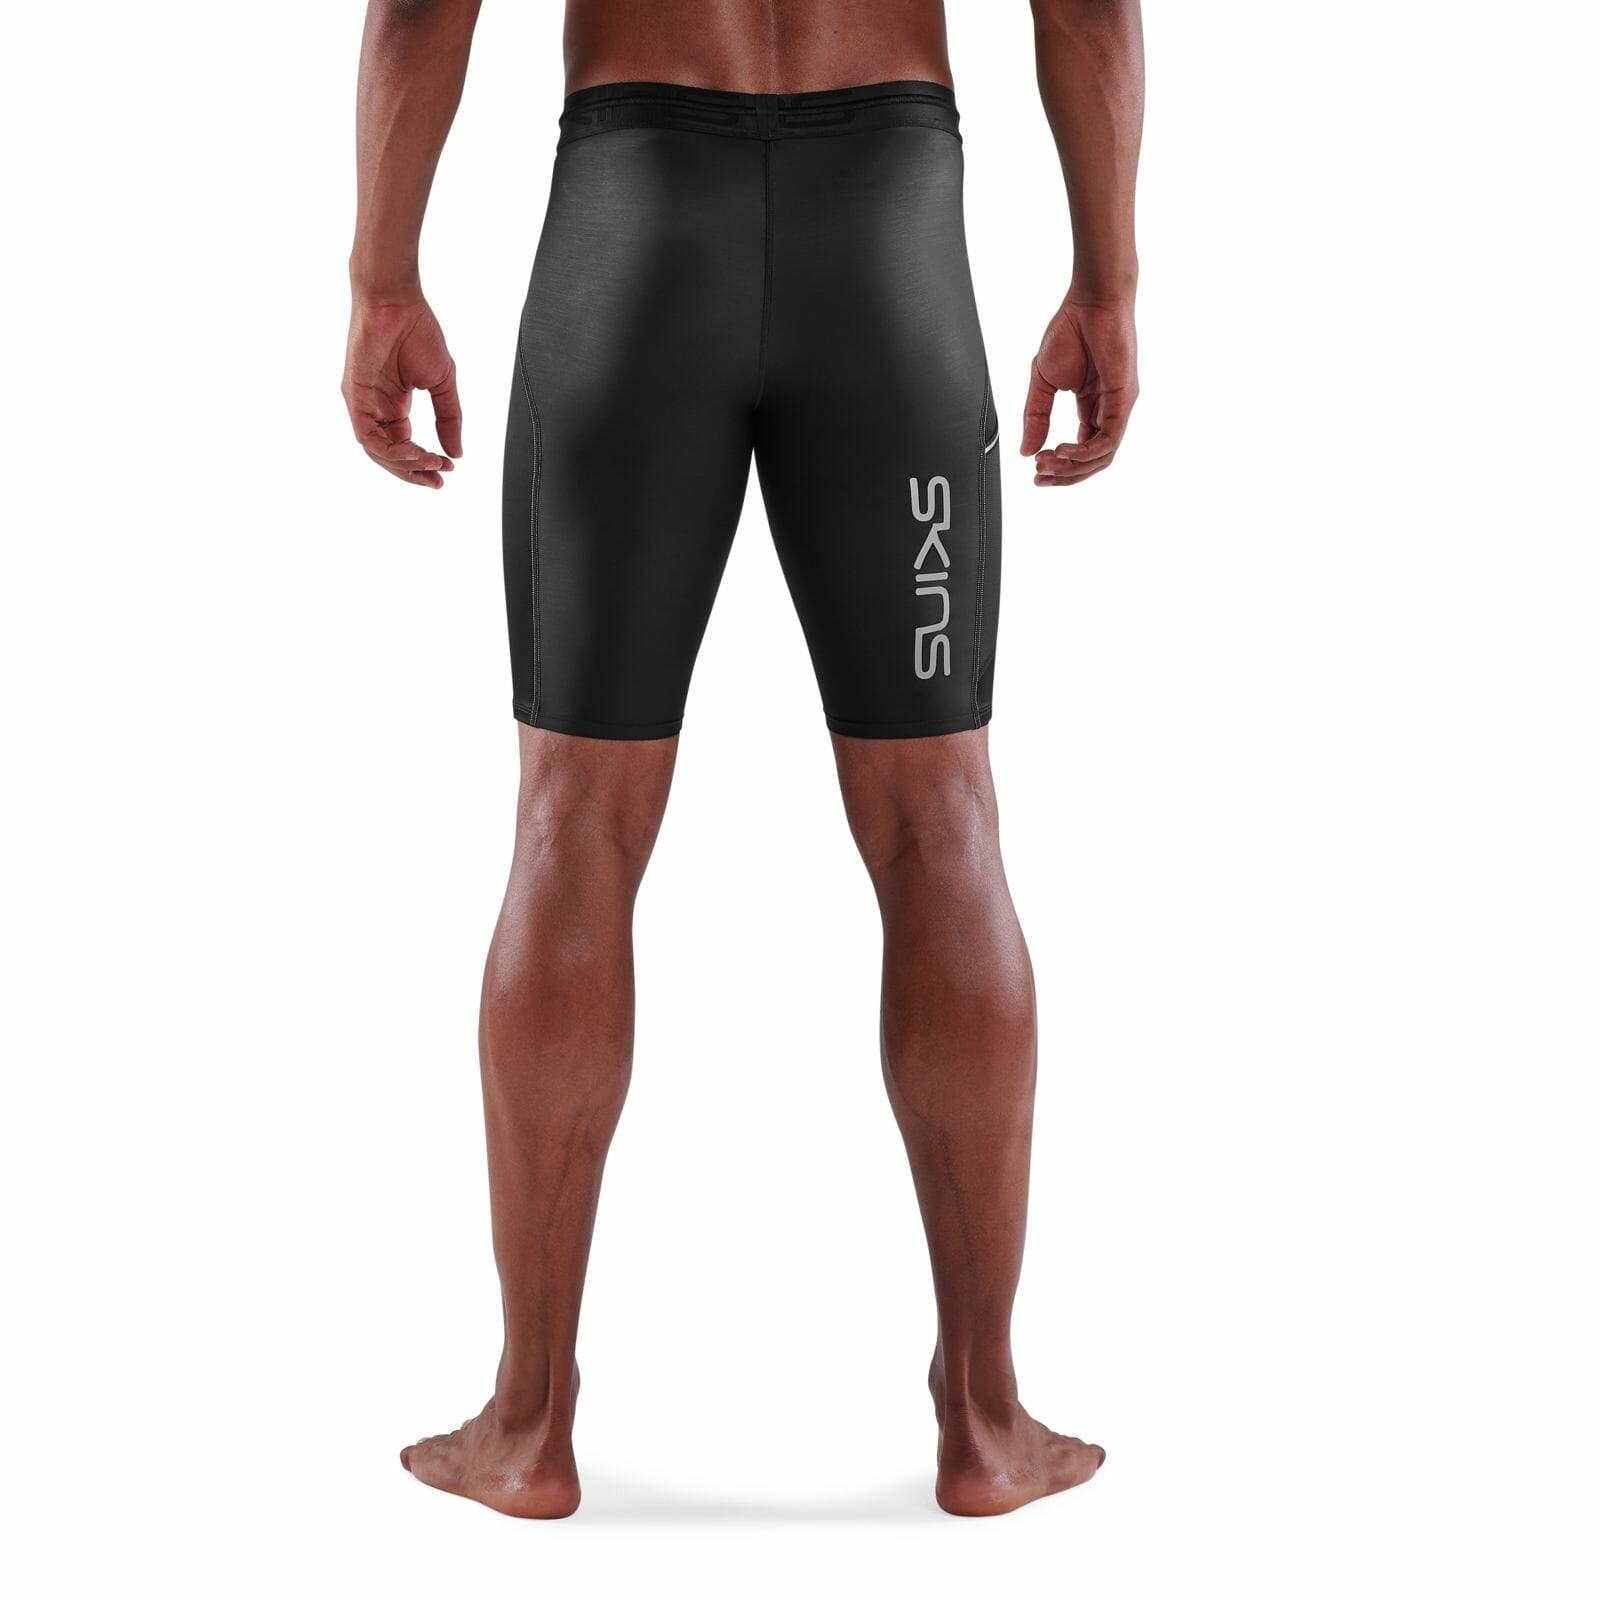 Skins Dnamic Compression Tights - Best Price in Singapore - Jan